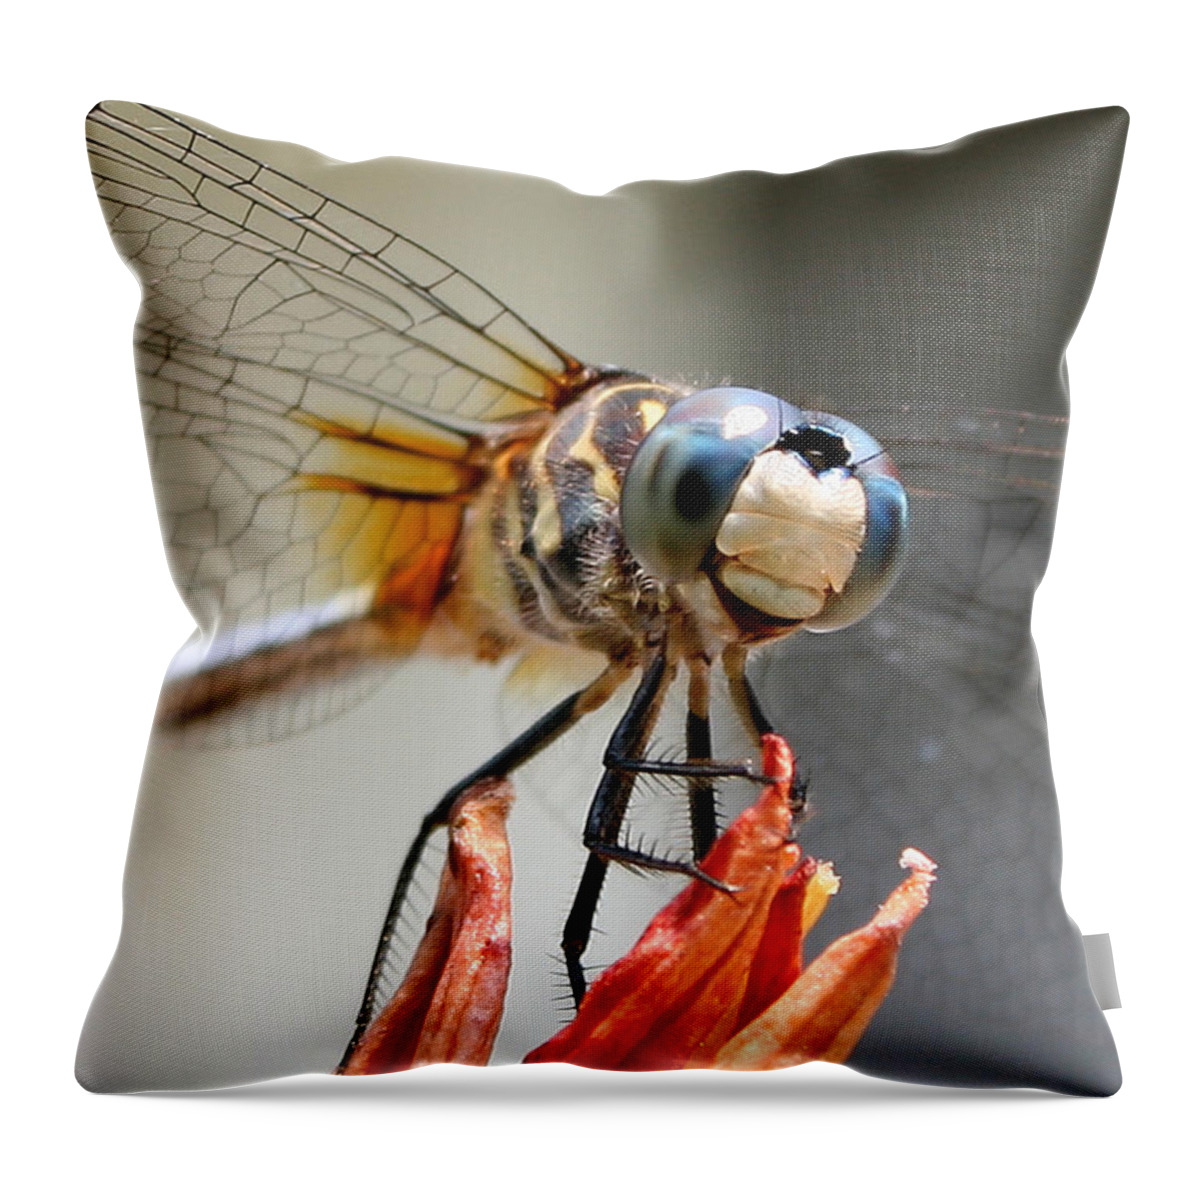 Nature Throw Pillow featuring the photograph Happy Dragonfly by William Selander